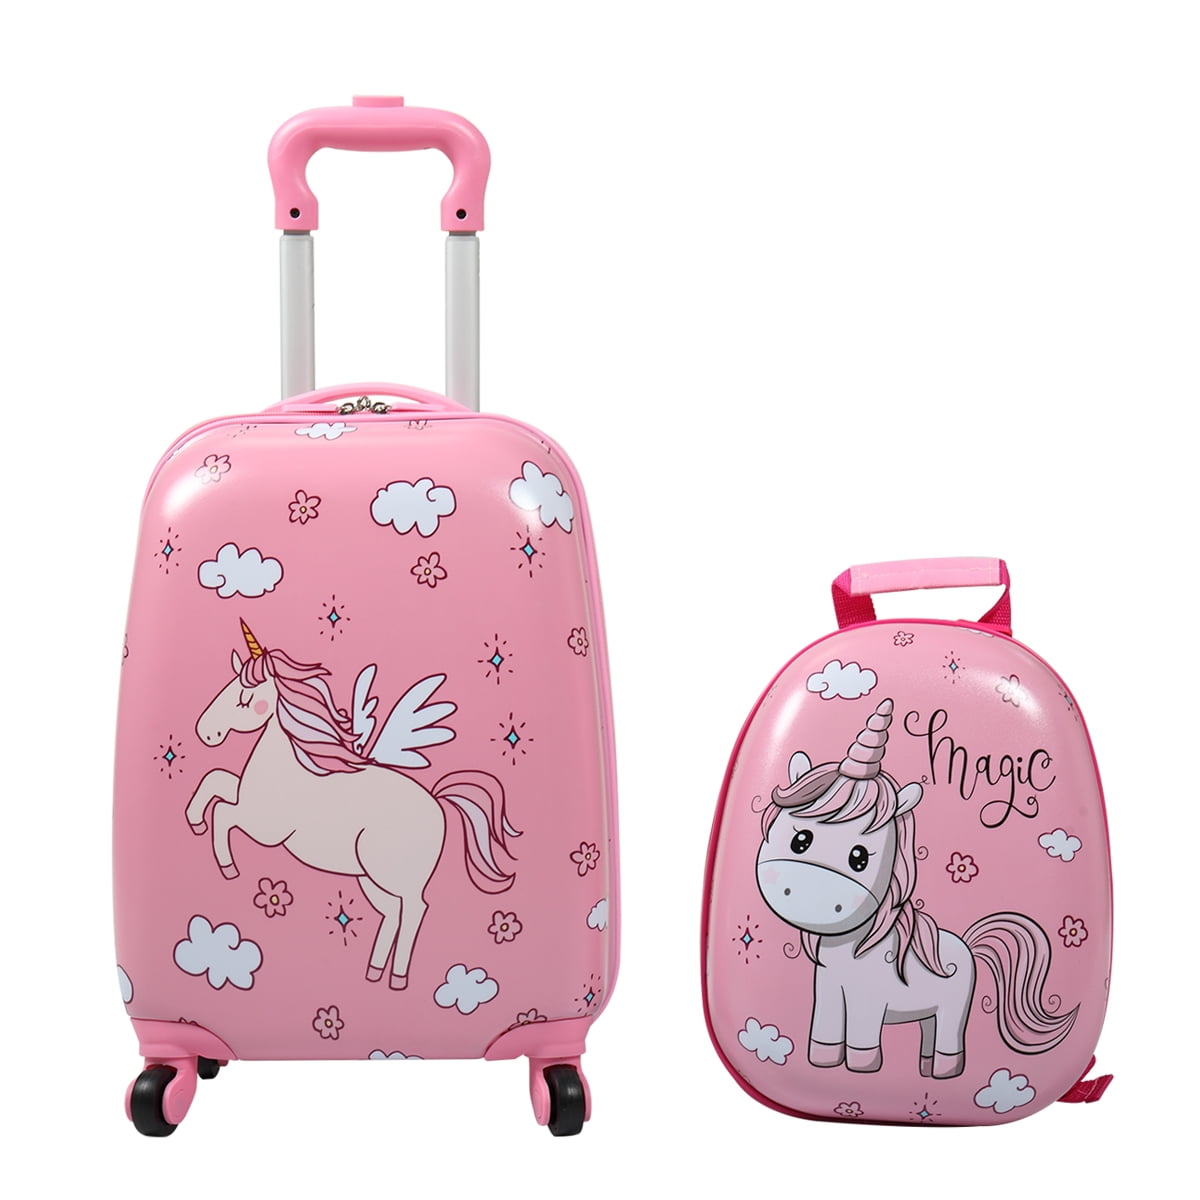 WCK Travel Kids Luggage 18inch Carry on Hard Side Upright Cartoon Spinner Luggage Rolling pink princess 